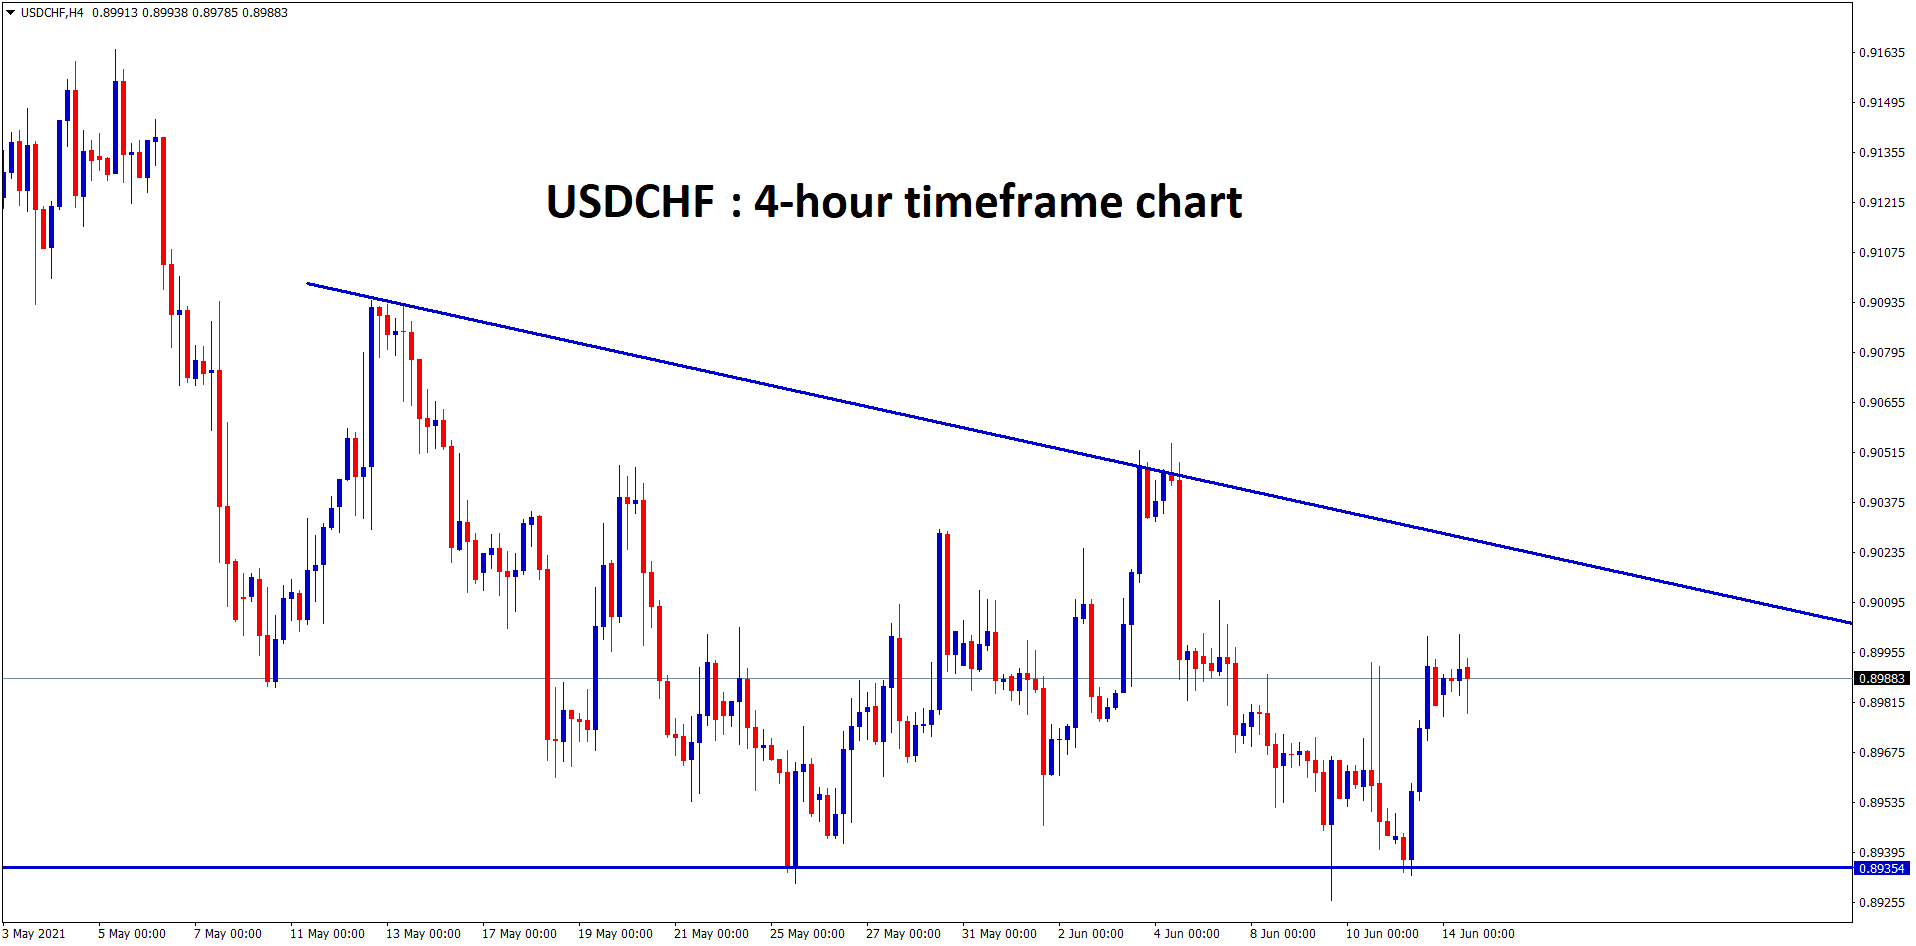 USDCHF is moving in a descending Triangle pattern